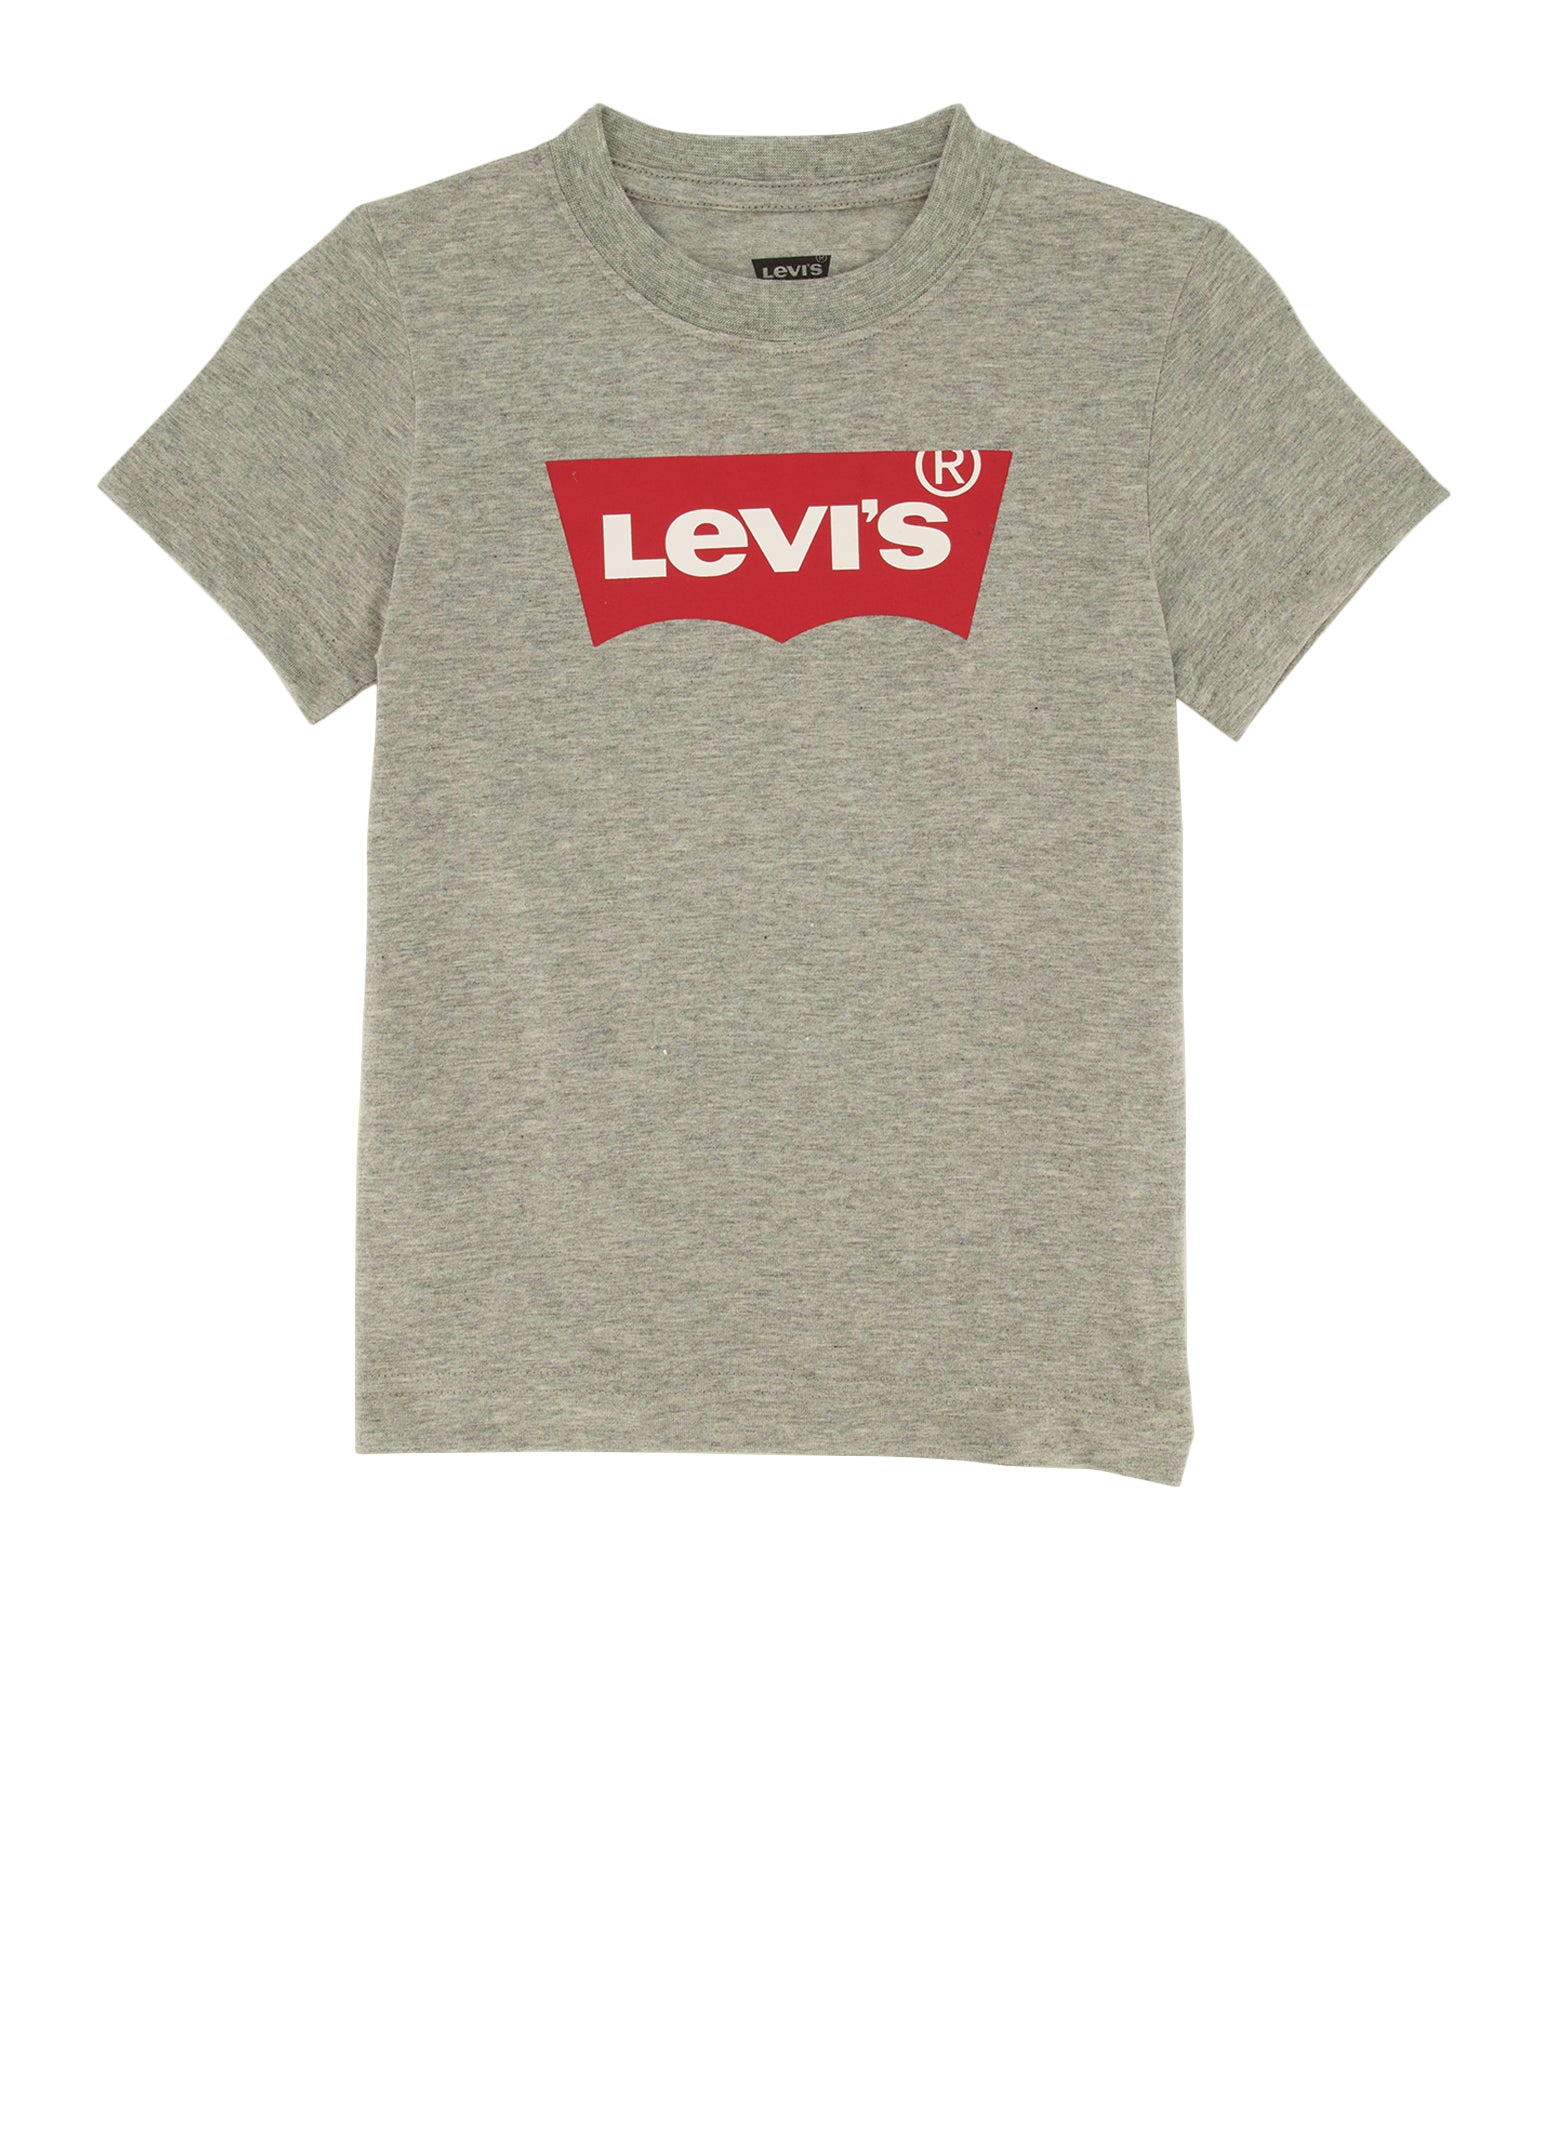 Little Boys Levis Classic Logo Graphic Tee, Grey, Size 6